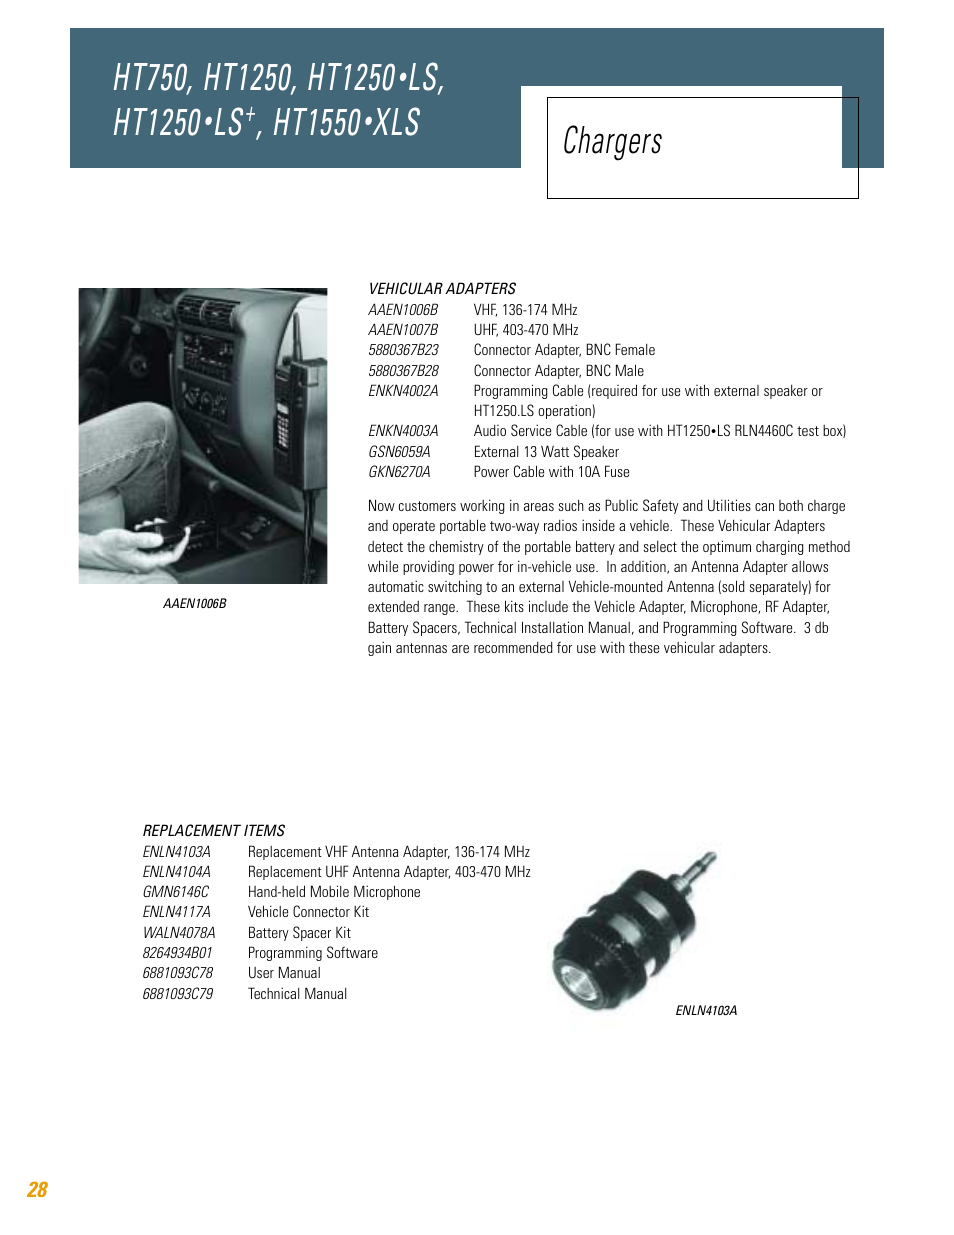 Ls, ht1250, Ht1550, Xls chargers | Motorola HT750 User Manual | Page 28